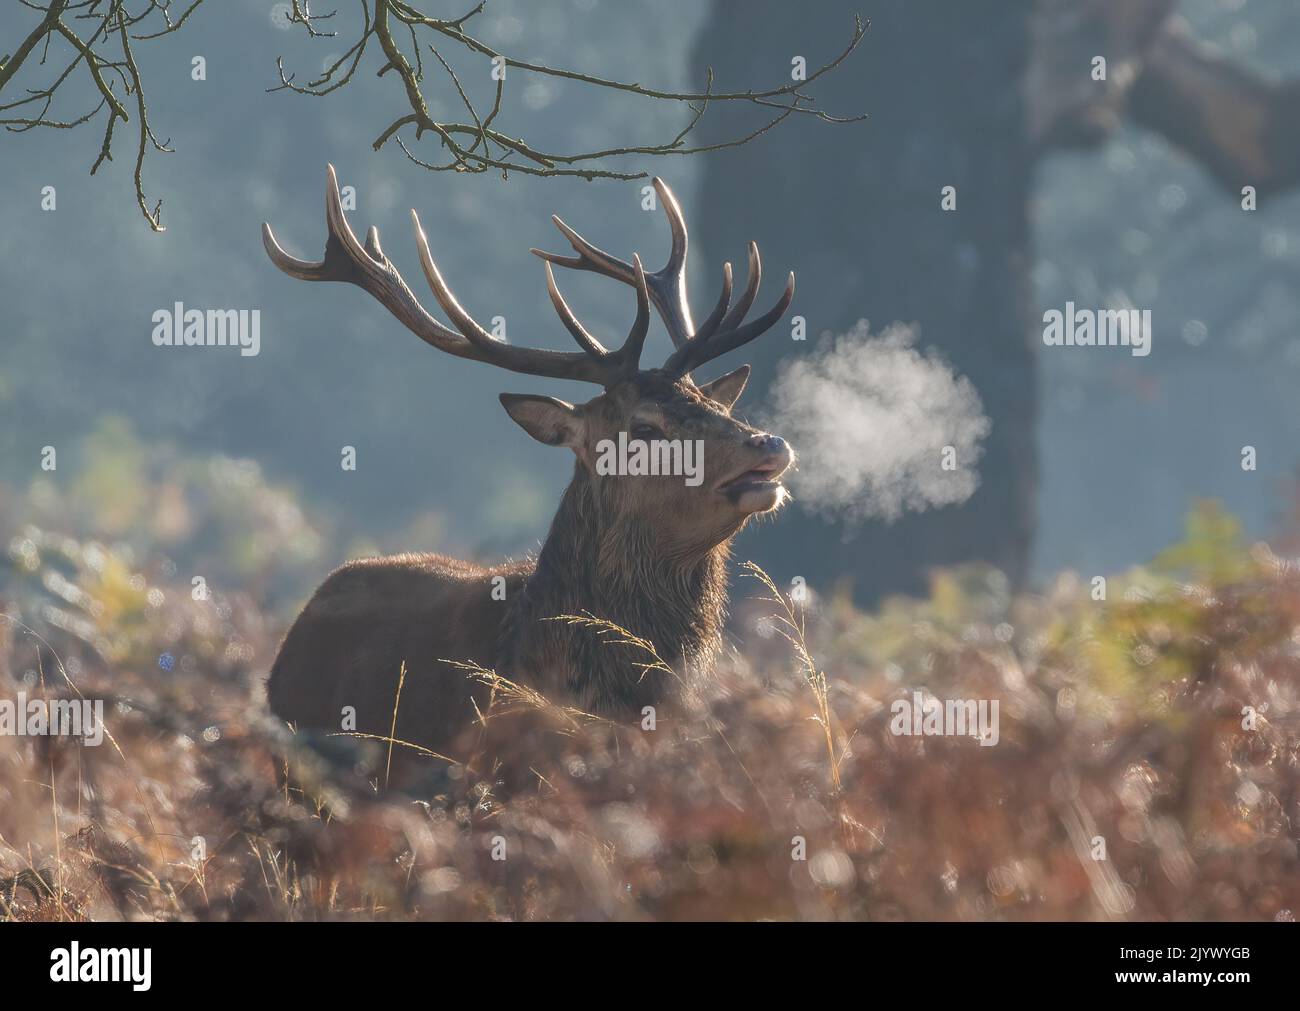 A majestic Red Deer Stag (Cervus elaphus) , huge antlers and his breath showing in the cold morning air  during the rutting season. Richmond UK. Stock Photo